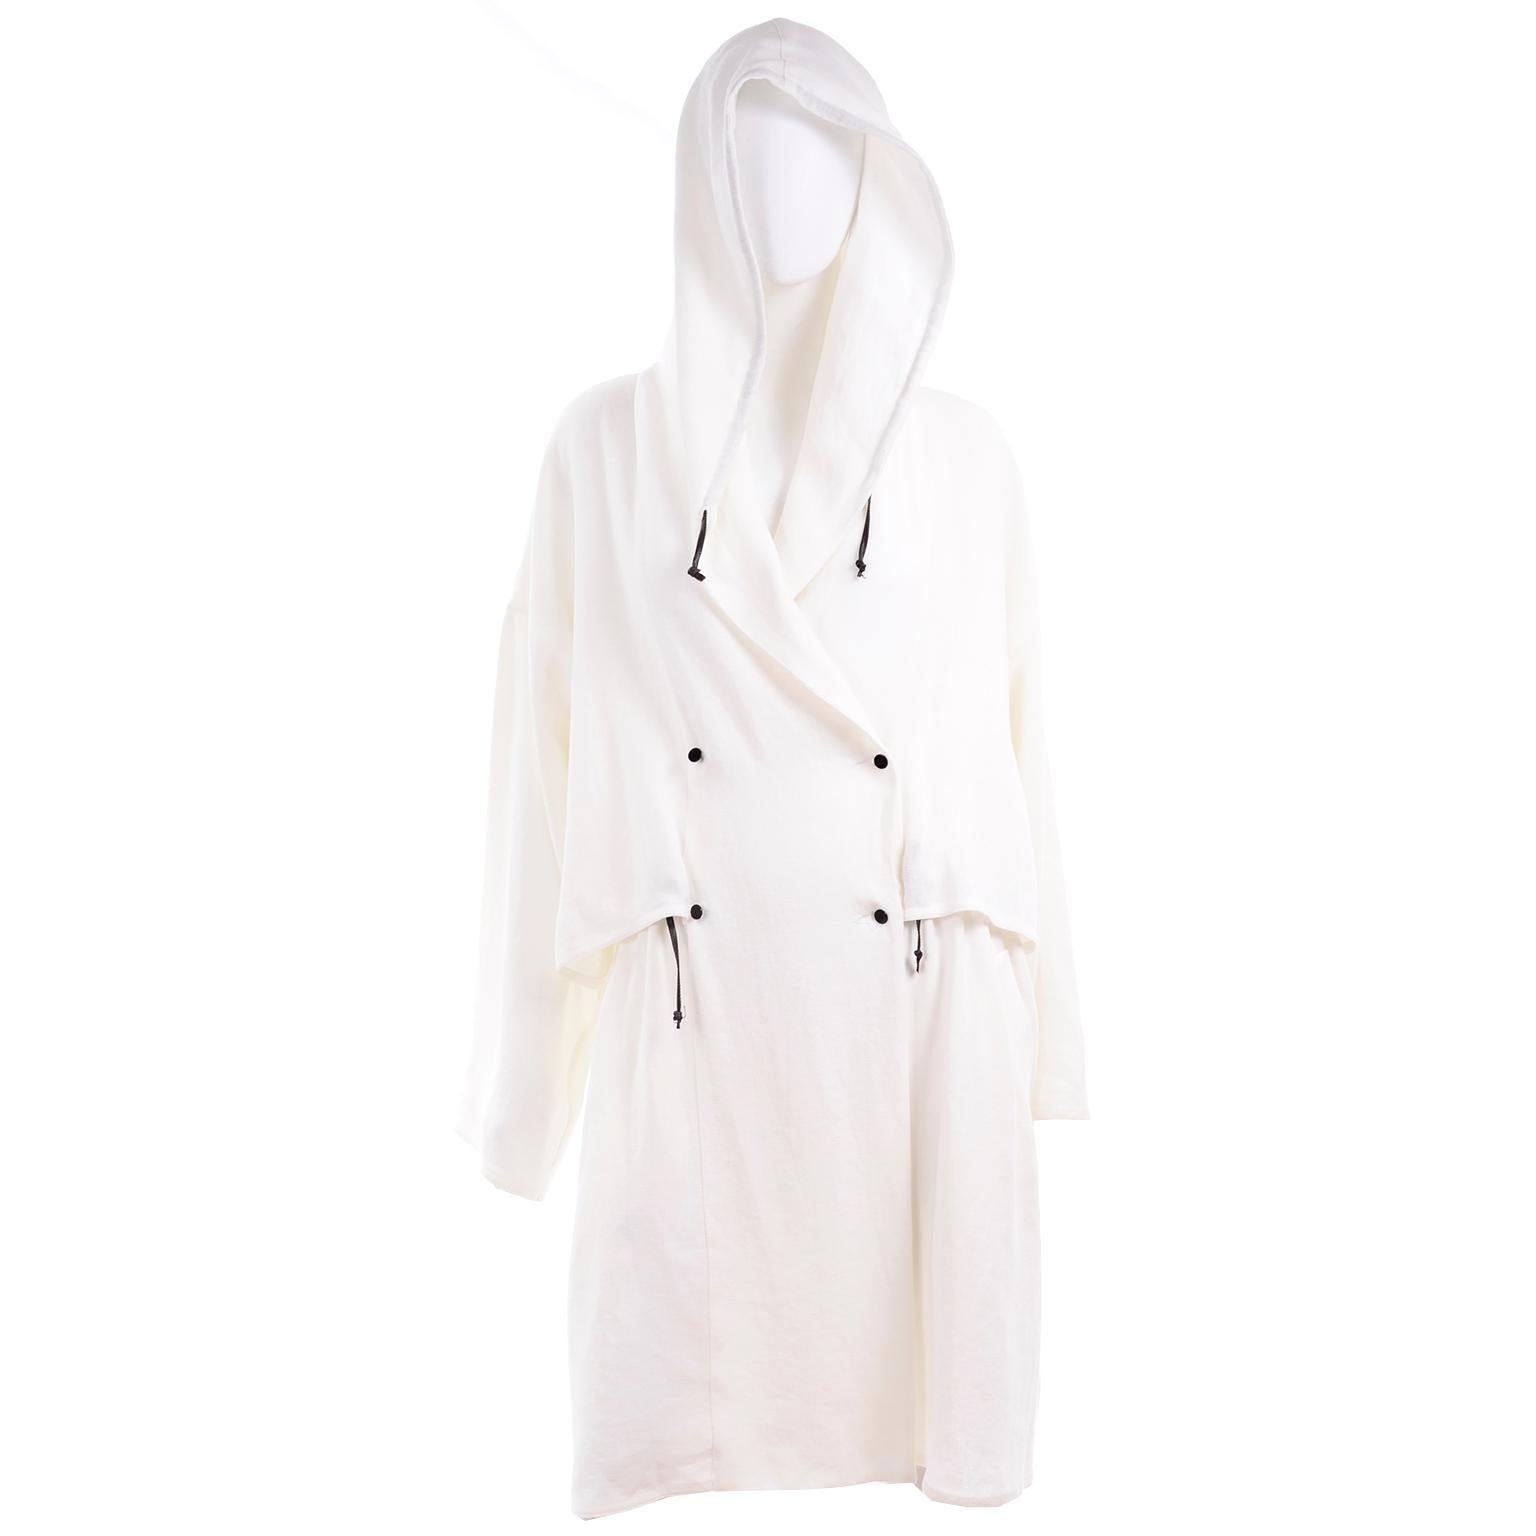 Deadstock New White Linen Dusan Coat Drawstring Jacket with Hood New With Tags 4